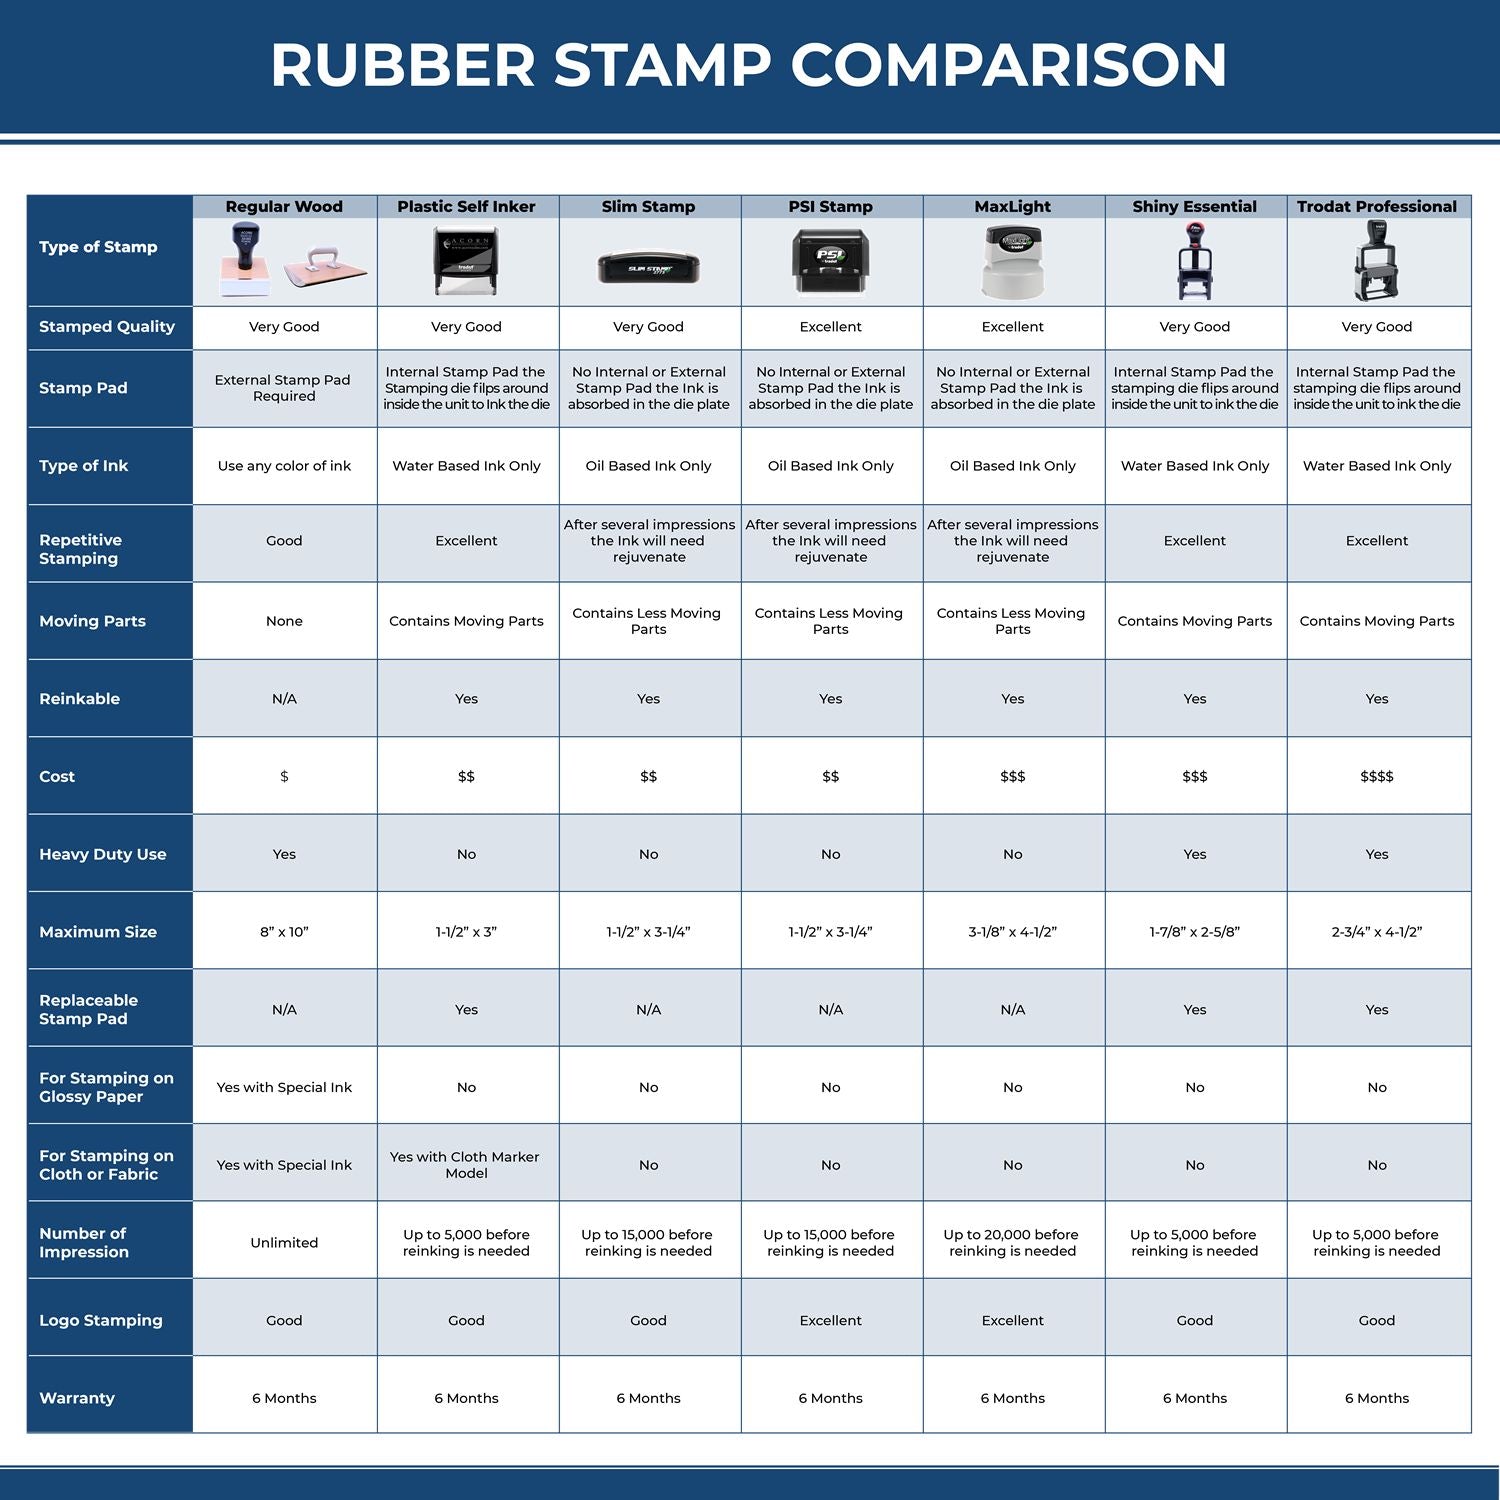 A comparison chart for the different types of mount models available for the Michigan Professional Engineer Seal Stamp.